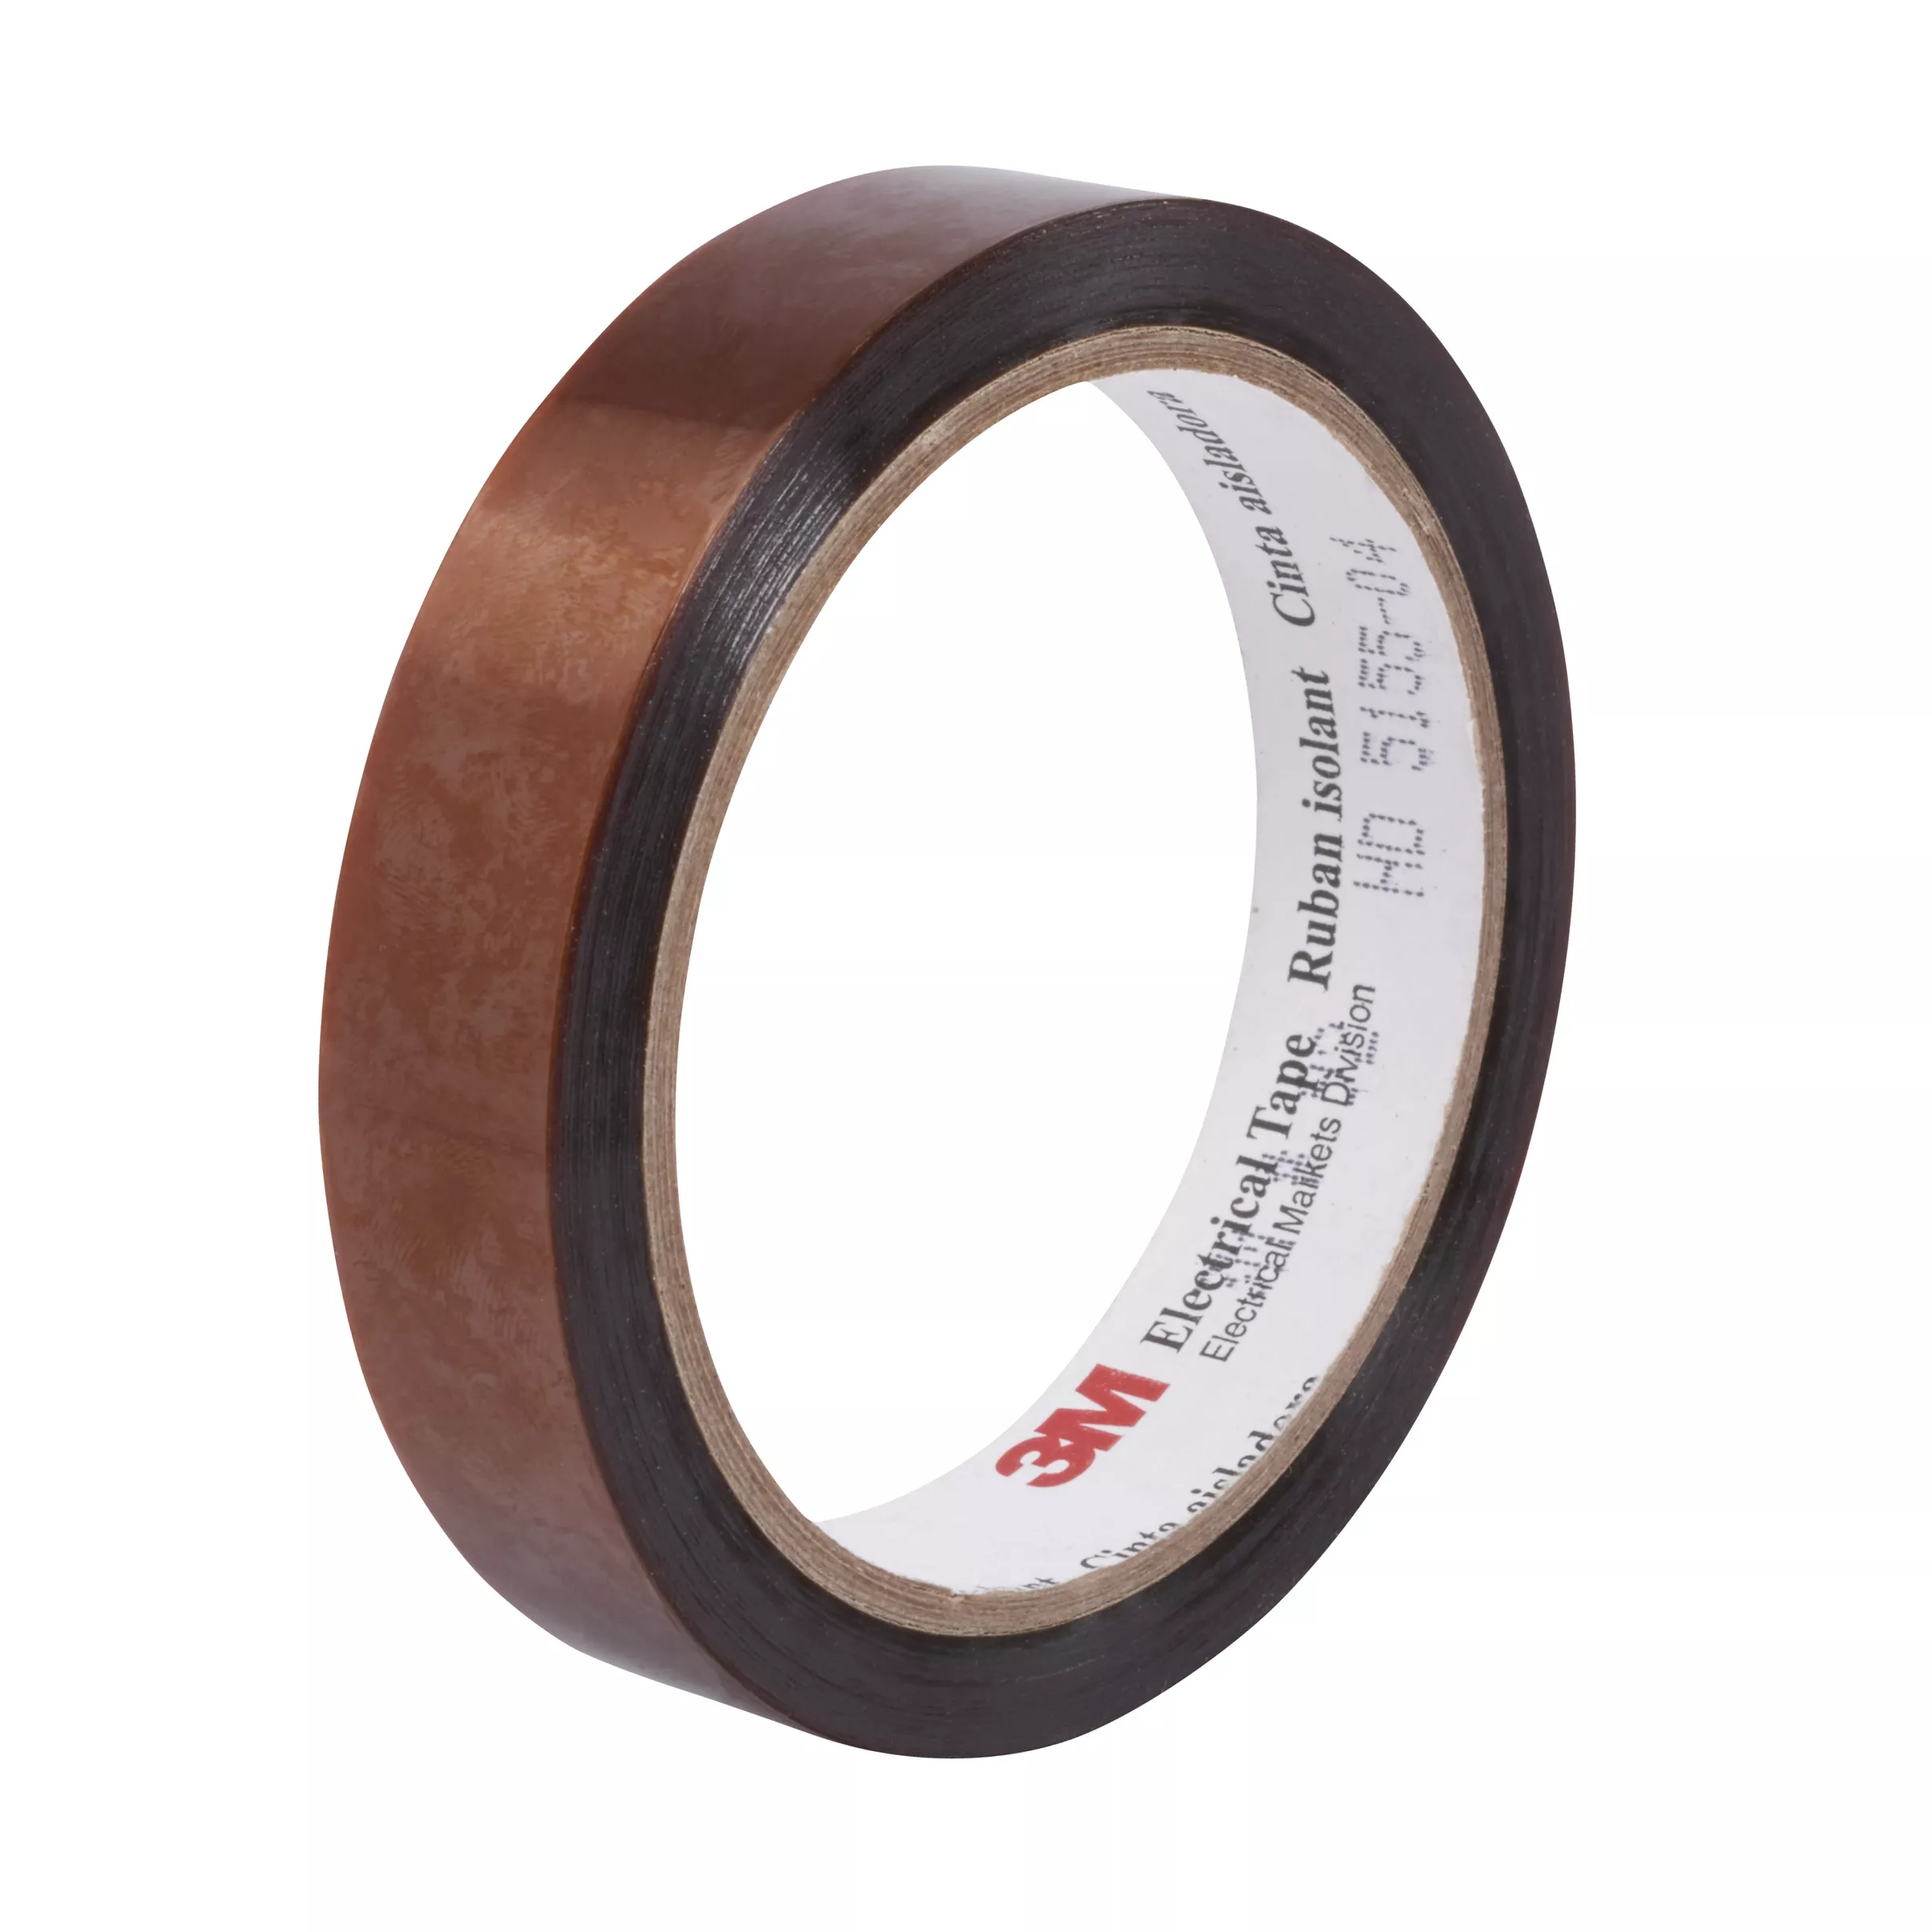 3M™ Polyimide Film Electrical Tape 92, Amber, Silicone Adhesive, 1 mil
film, 12 in x 36 yd logroll, 3